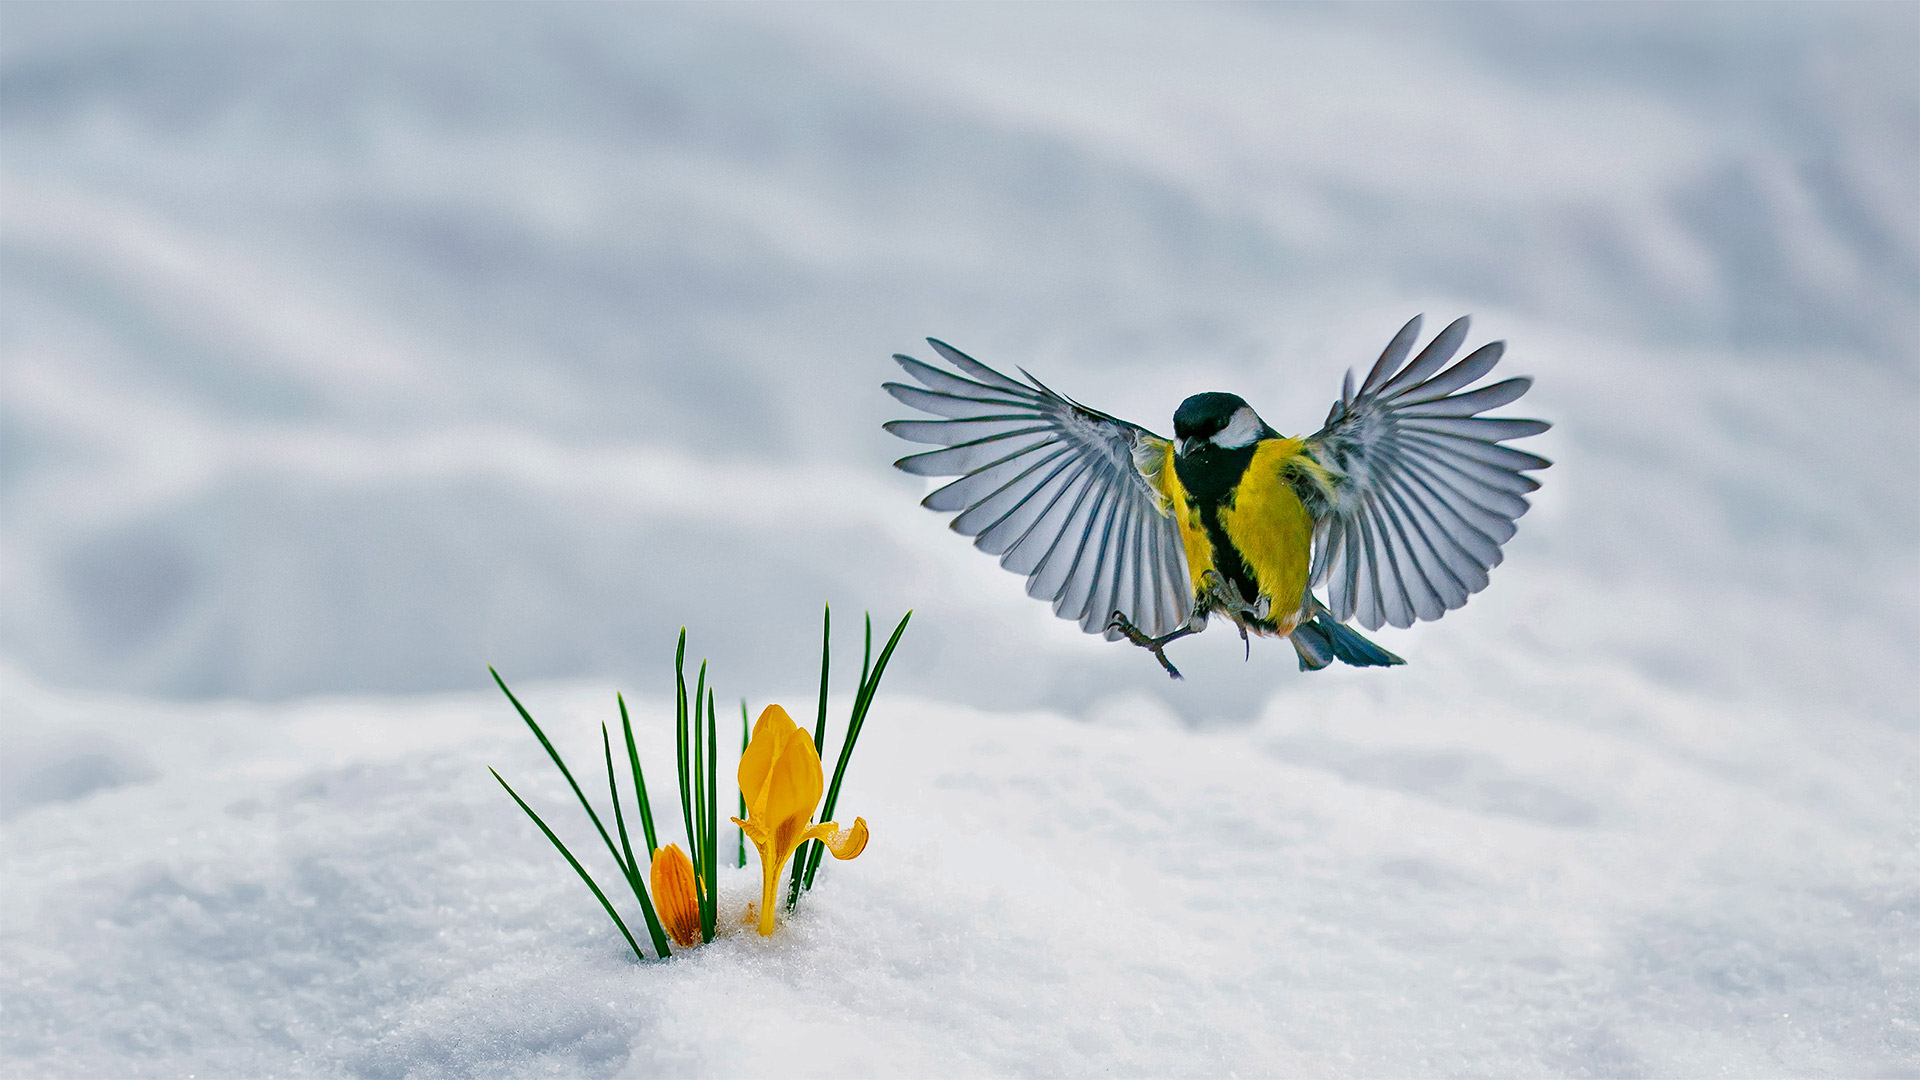 Great tit and yellow crocuses - Nataba/Getty Images)